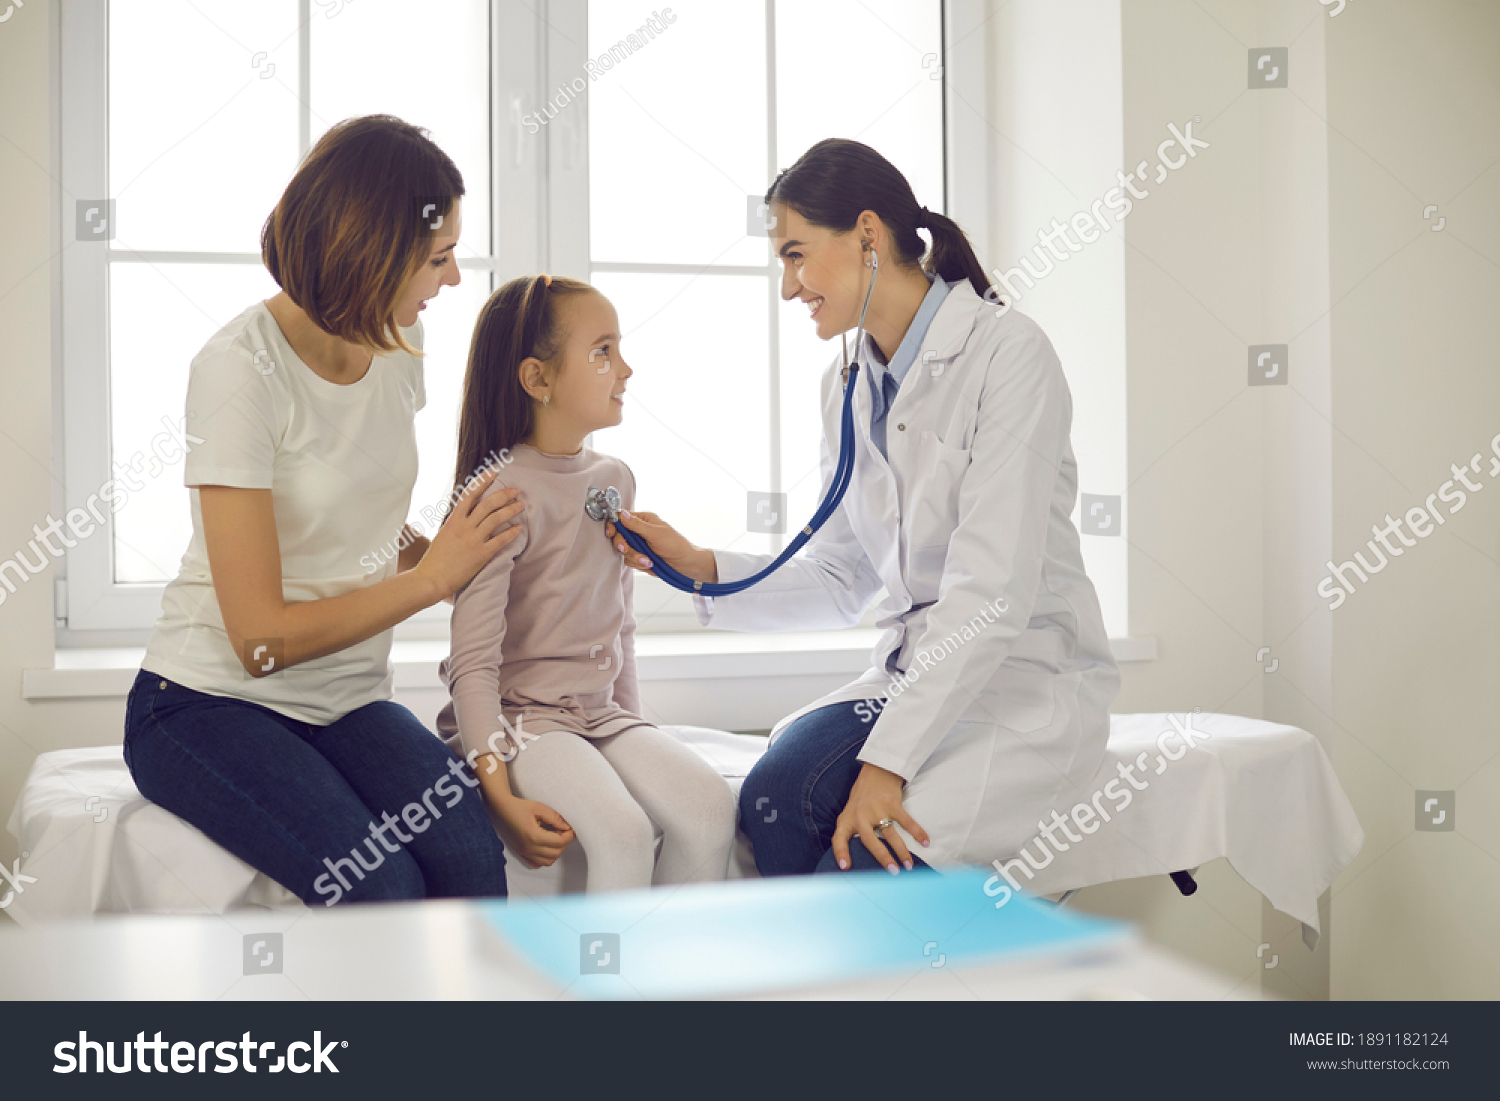 Mother and child seeing family practitioner. Smiling pediatrician with stethoscope checking little girl's lungs. Friendly doctor listening to young patient's breath or heartbeat during medical exam #1891182124